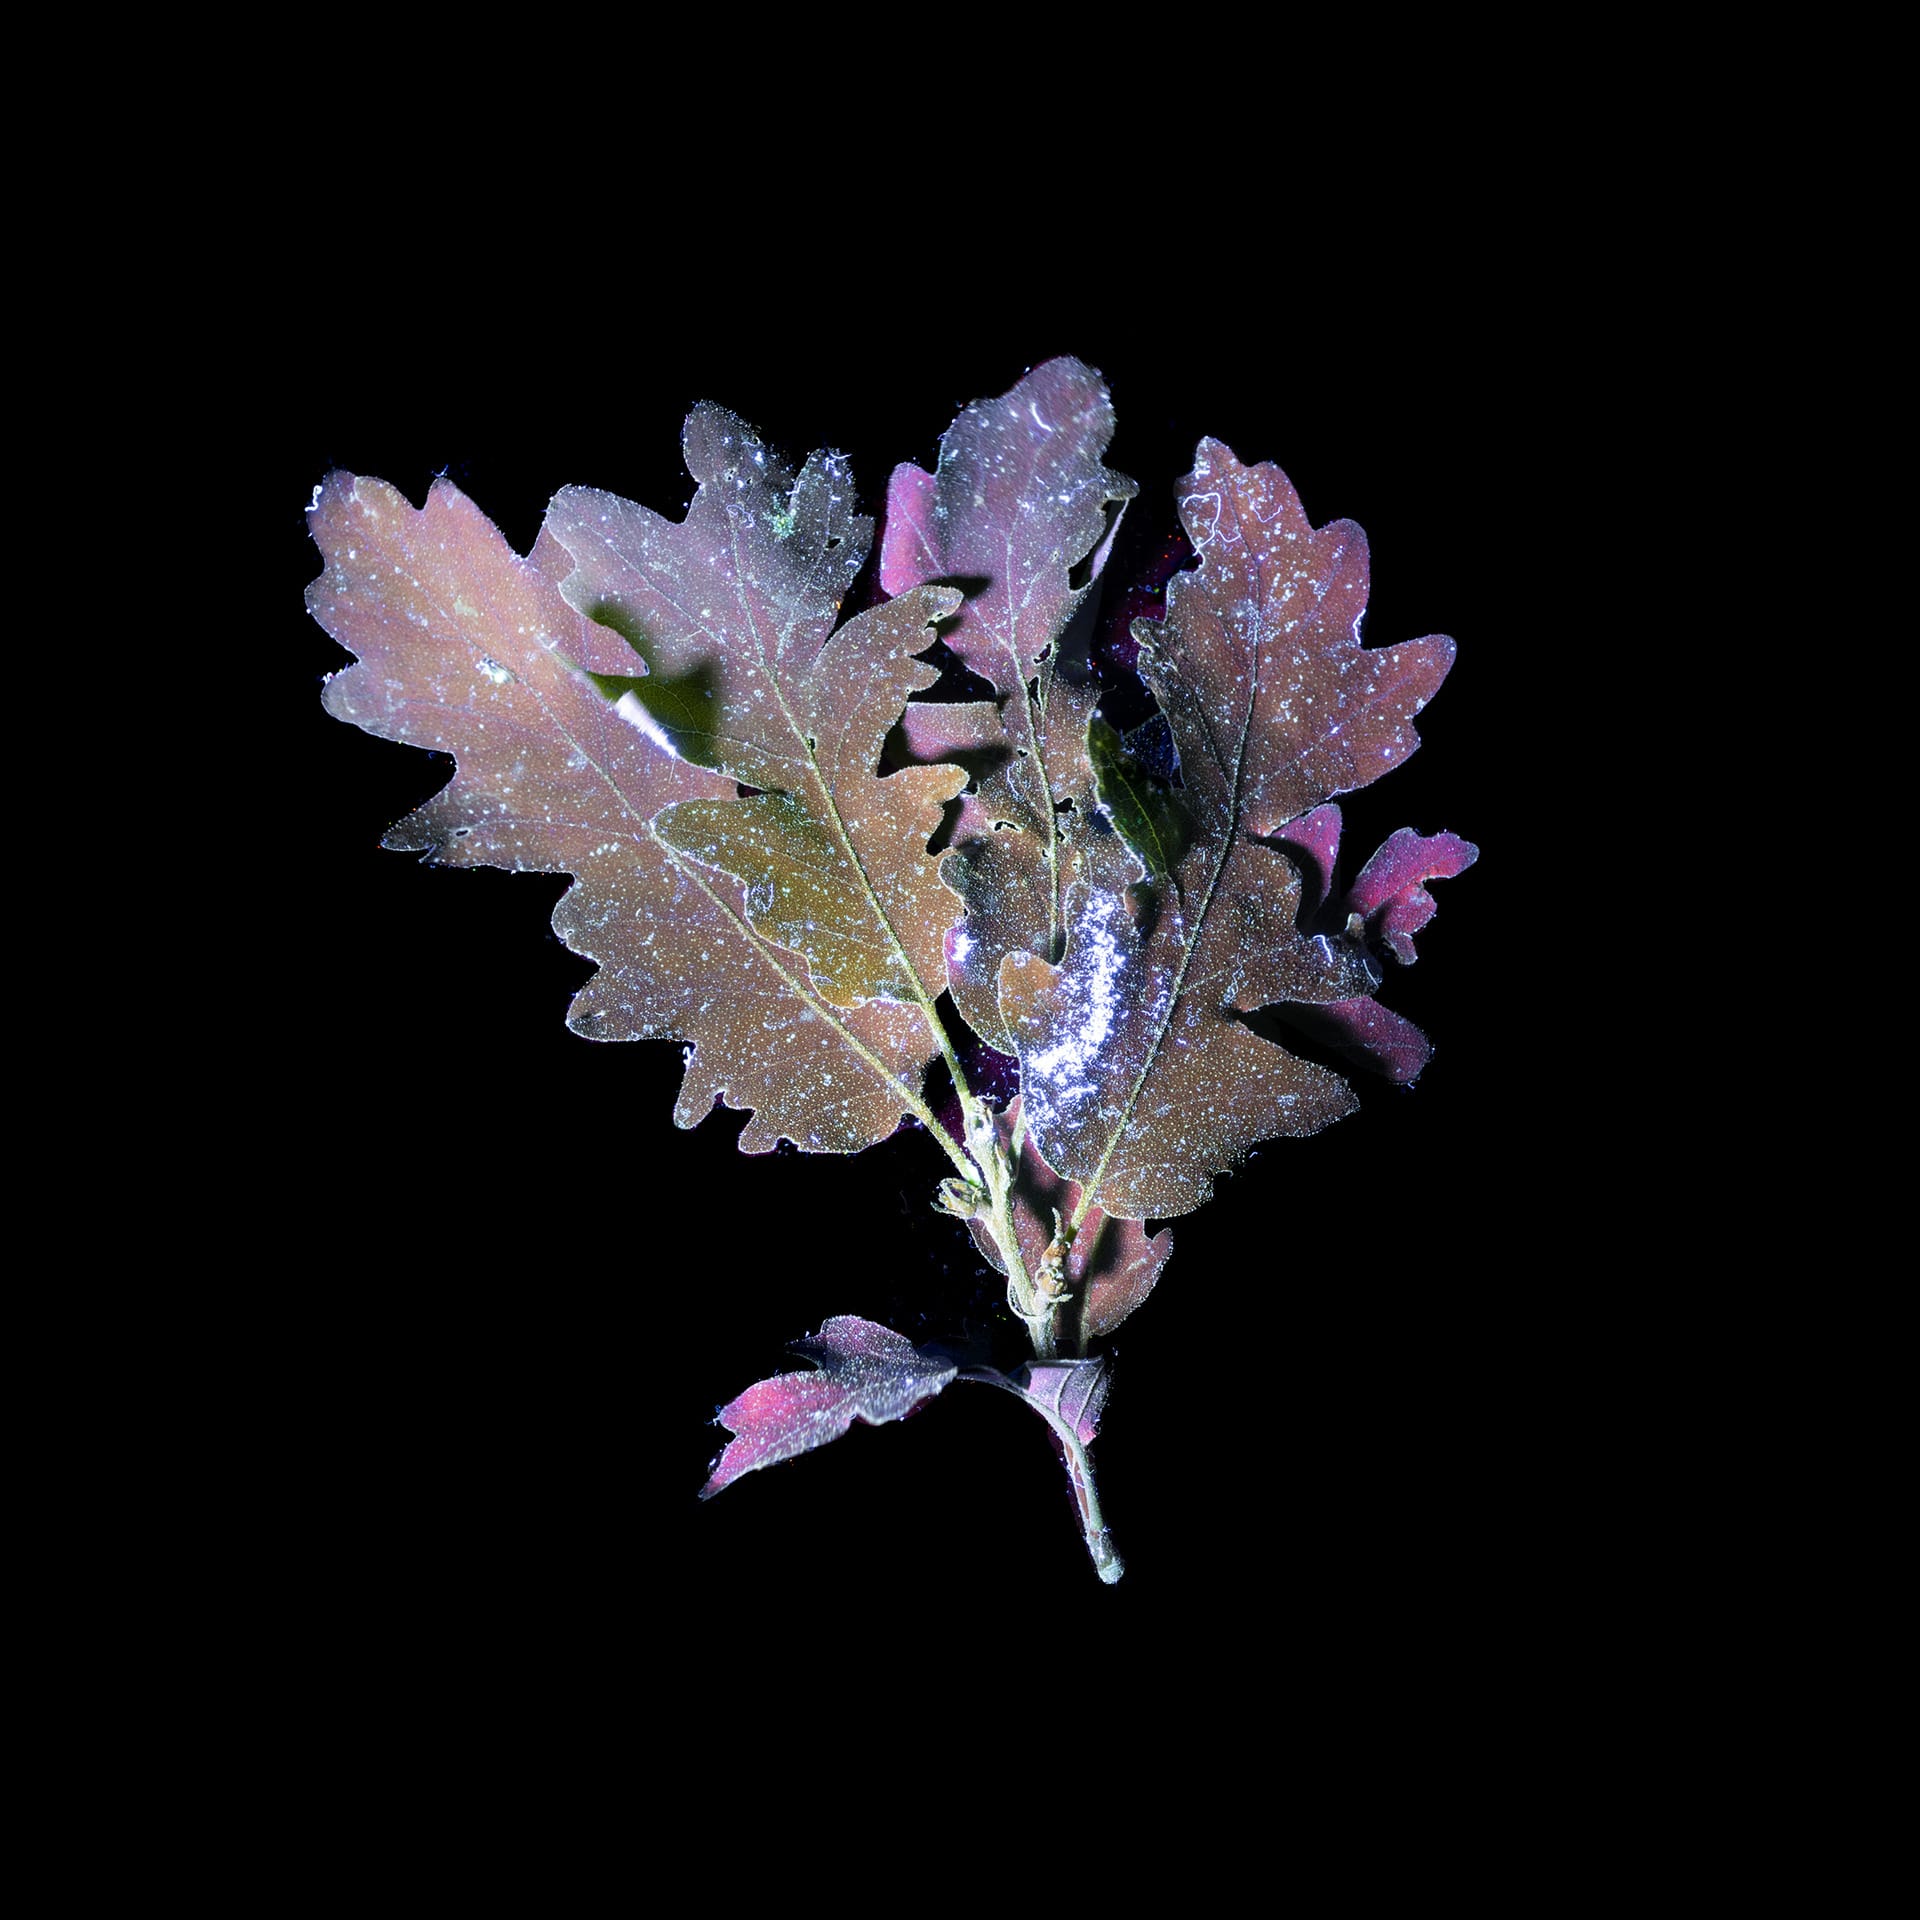 A leaf taken using ultraviolet-induced visible fluorescences. In green and pink with blue dust, on a black background.